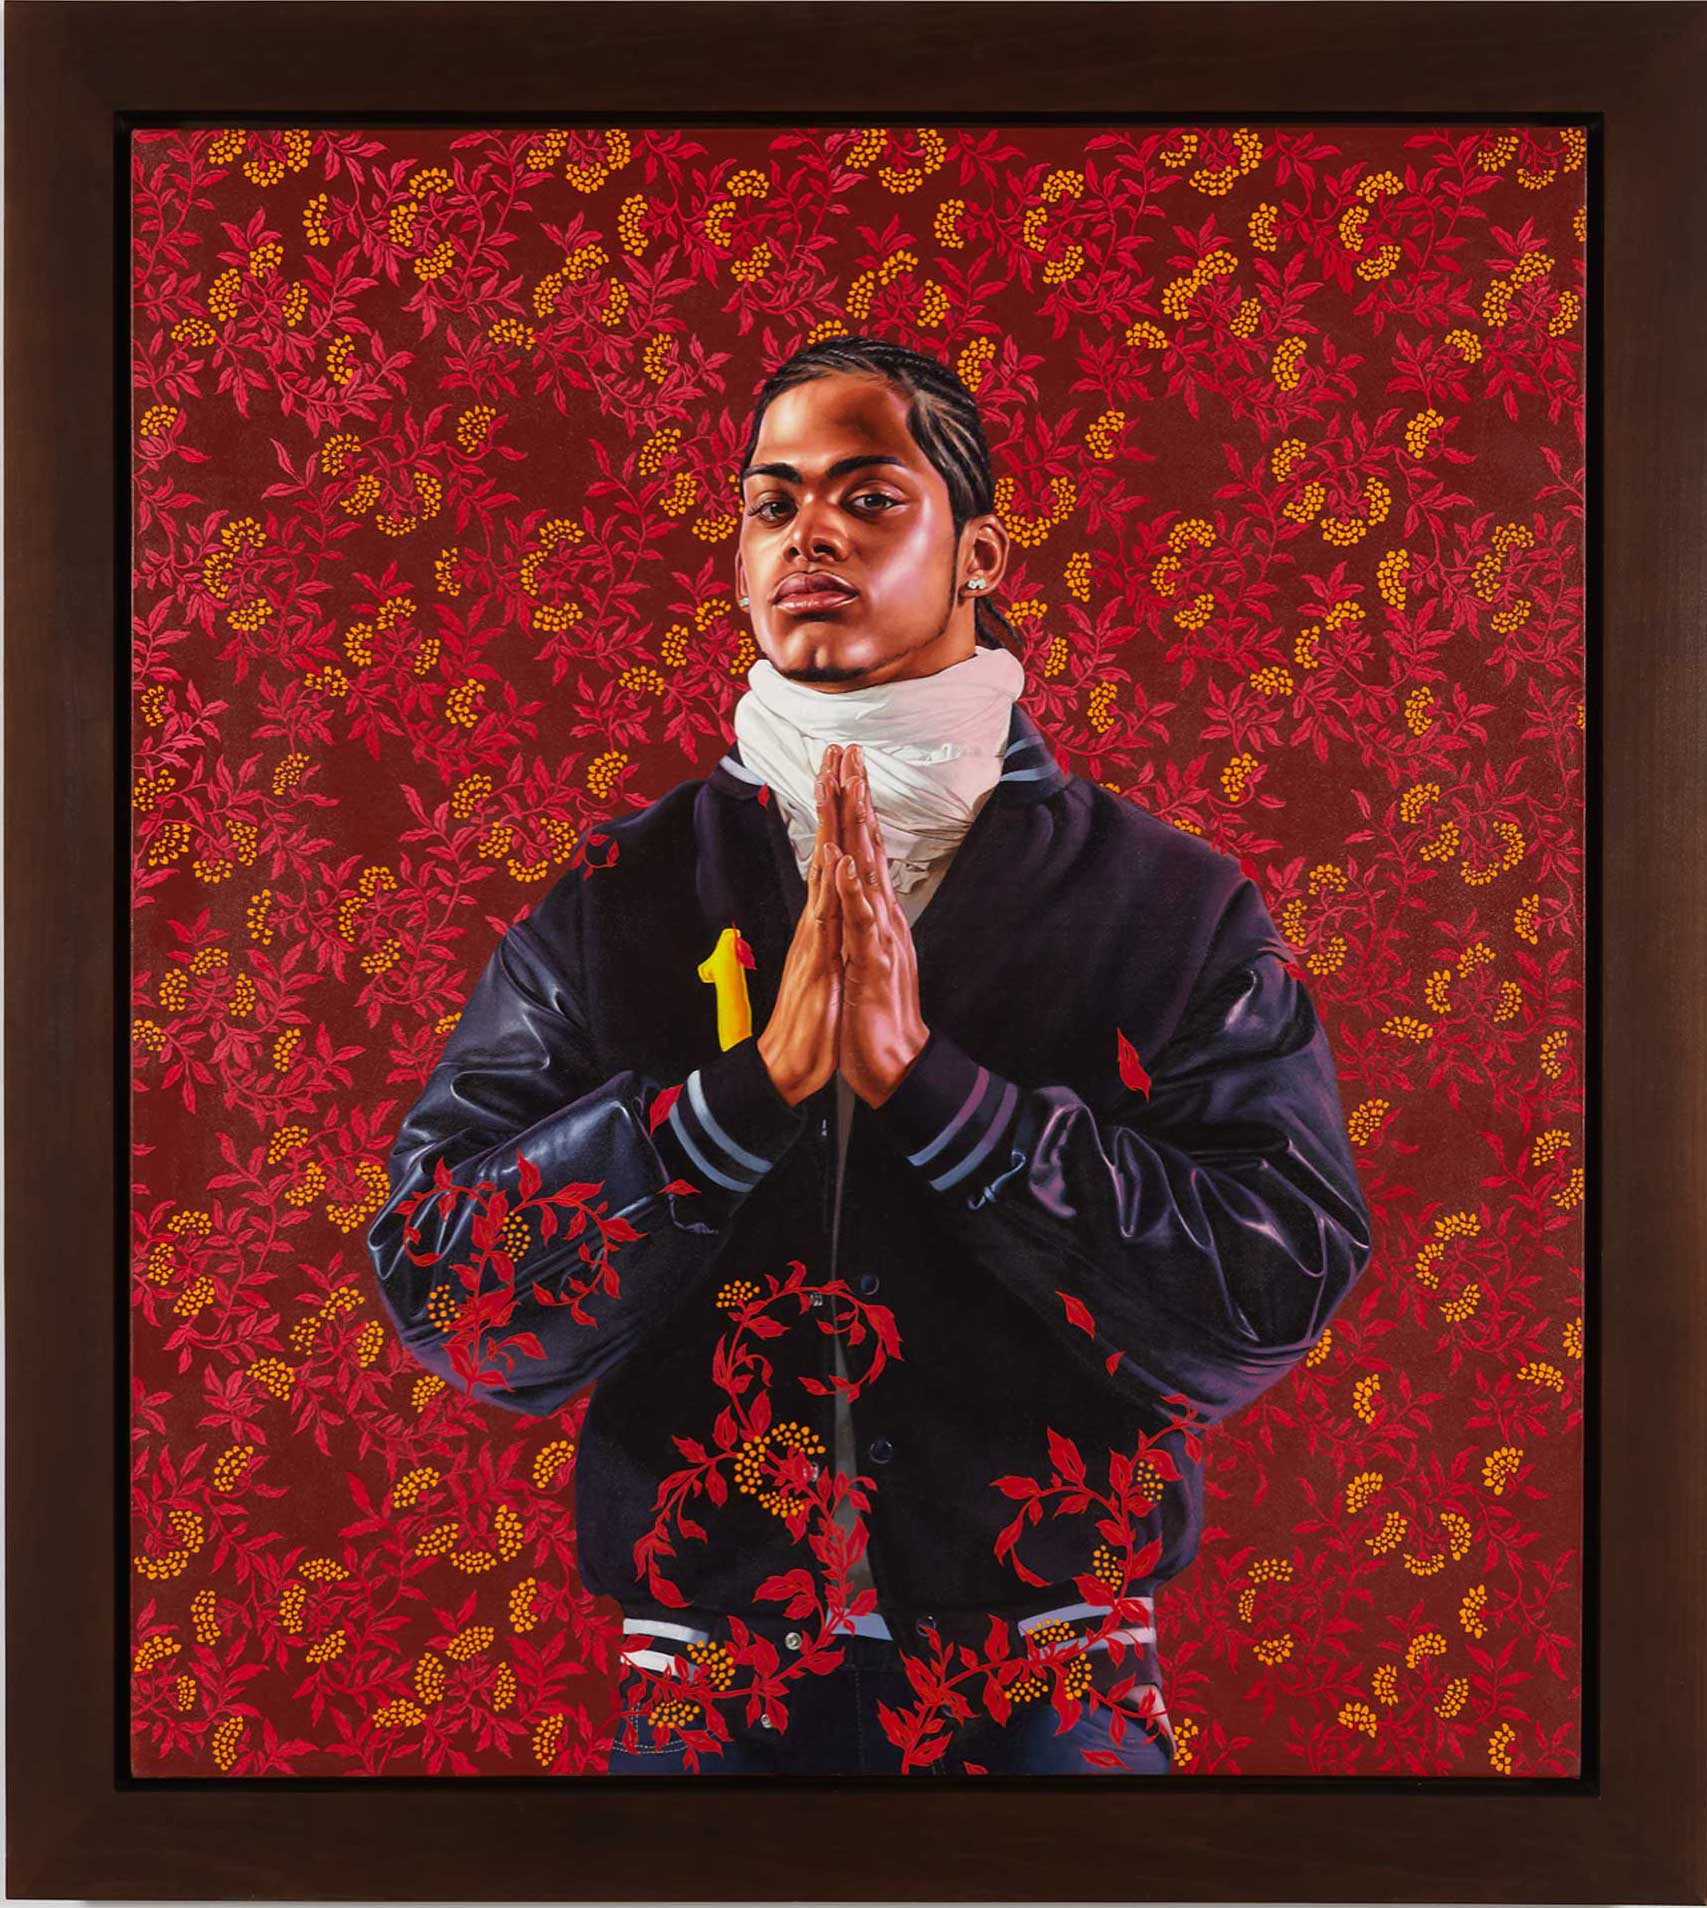 Kehinde Wiley | Selected Works: 2012 | Saint Denis, 2012, Oil on Canvas. | 4